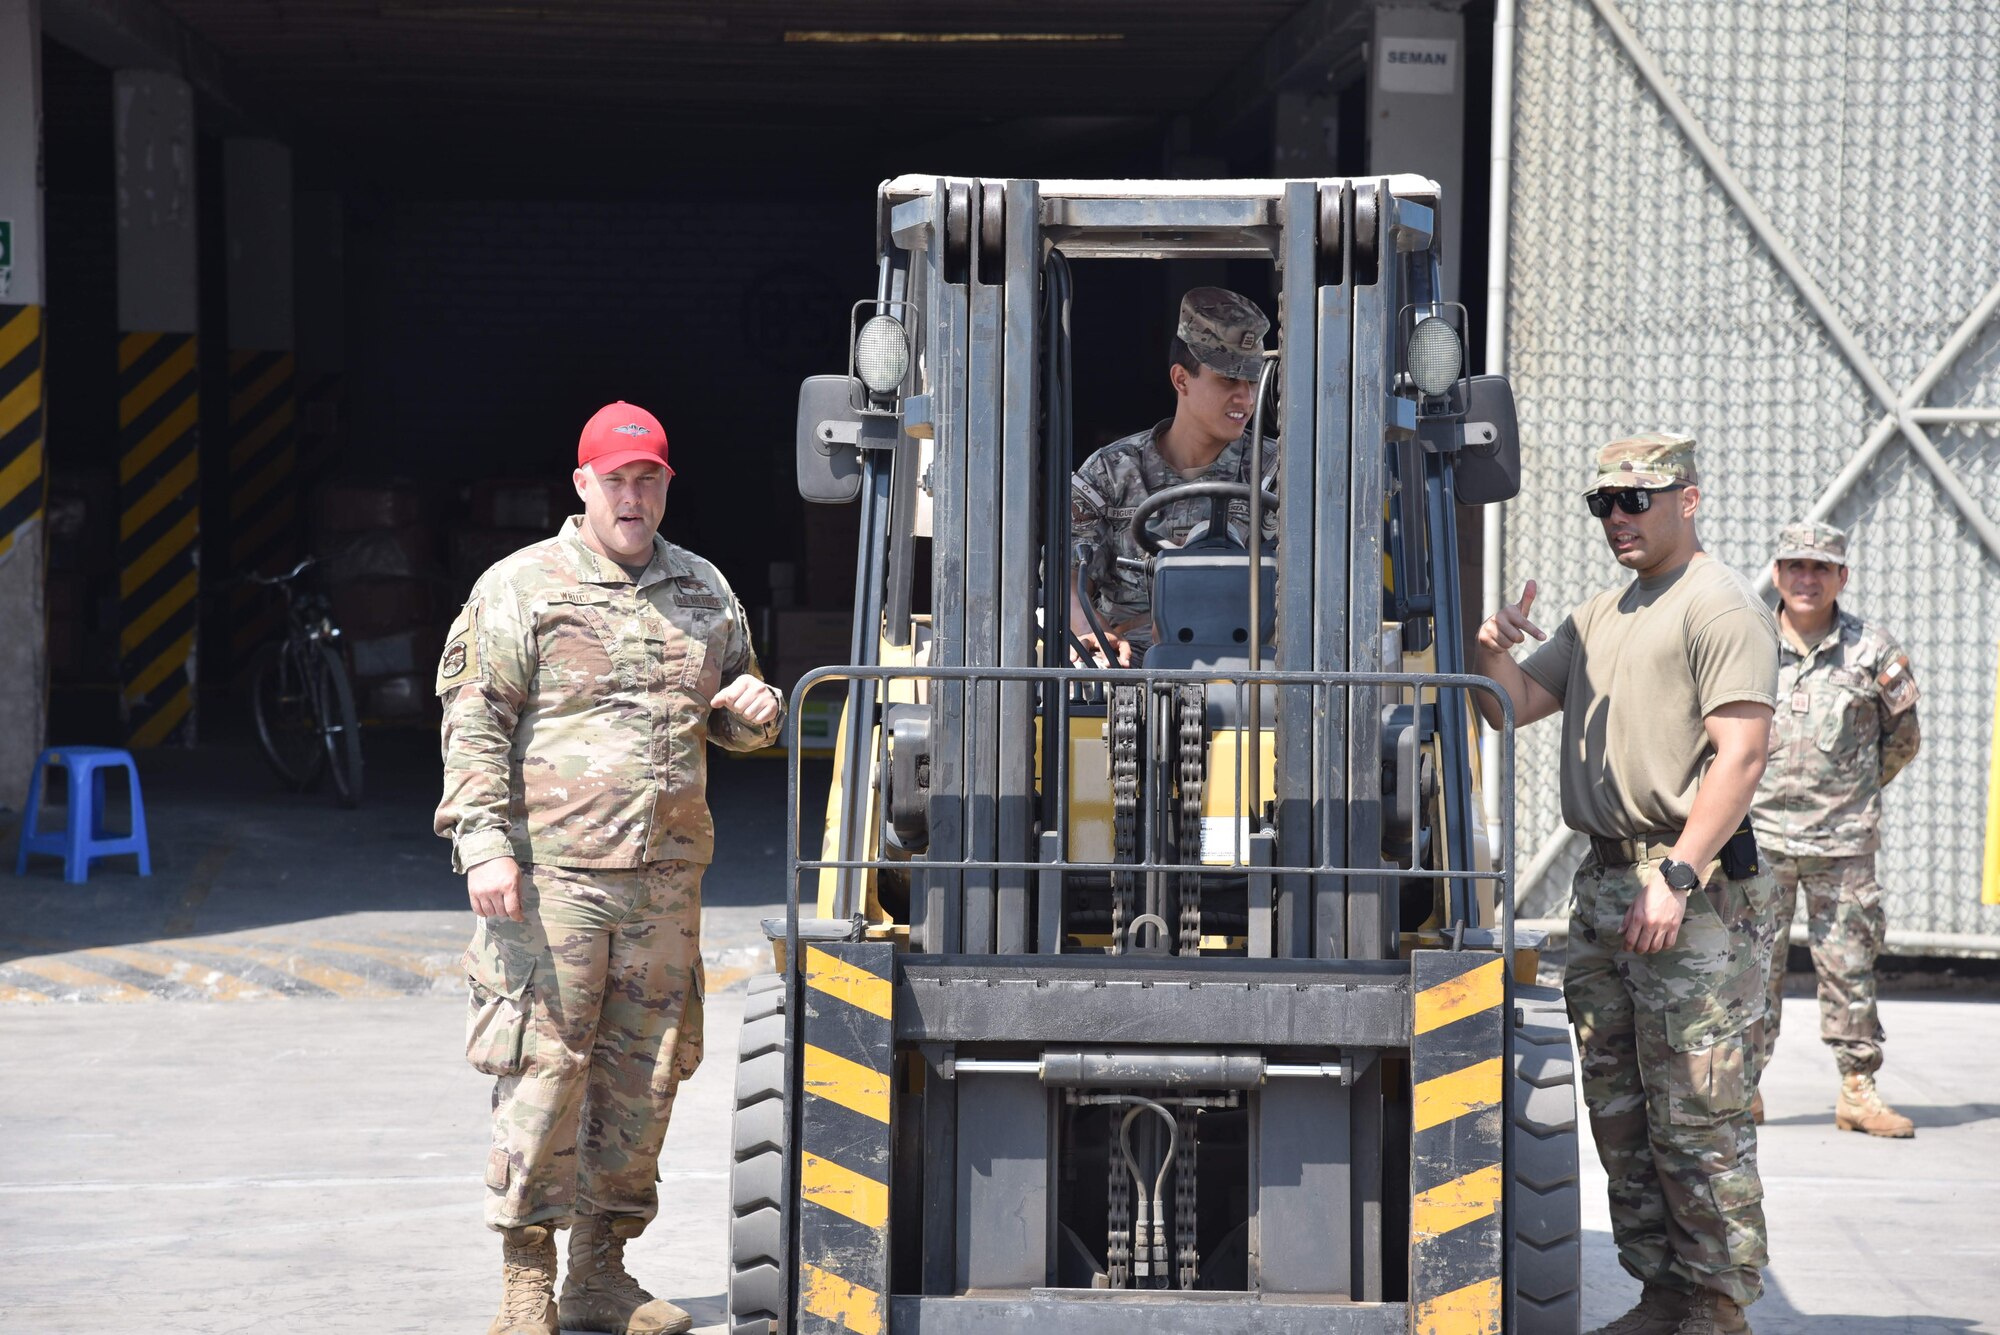 U.S. Air Force Tech. Sgts. Joseph Wruck, left, and James Garcia Arvelo, right, both air advisors from the 571st Mobility Support Advisory Squadron, teach Peruvian Air Force student Renato Rubén Figueroa Vasquez how to operate a forklift during a mobile training team mission with the Peruvian Air Force at Callao Air Base in Lima, Perú. The MTT included three weeks of instruction at Callao and covered three general areas: an introduction to aerial logistics and logistical management mindset, hazardous material management, and cargo loading. (courtesy photo)